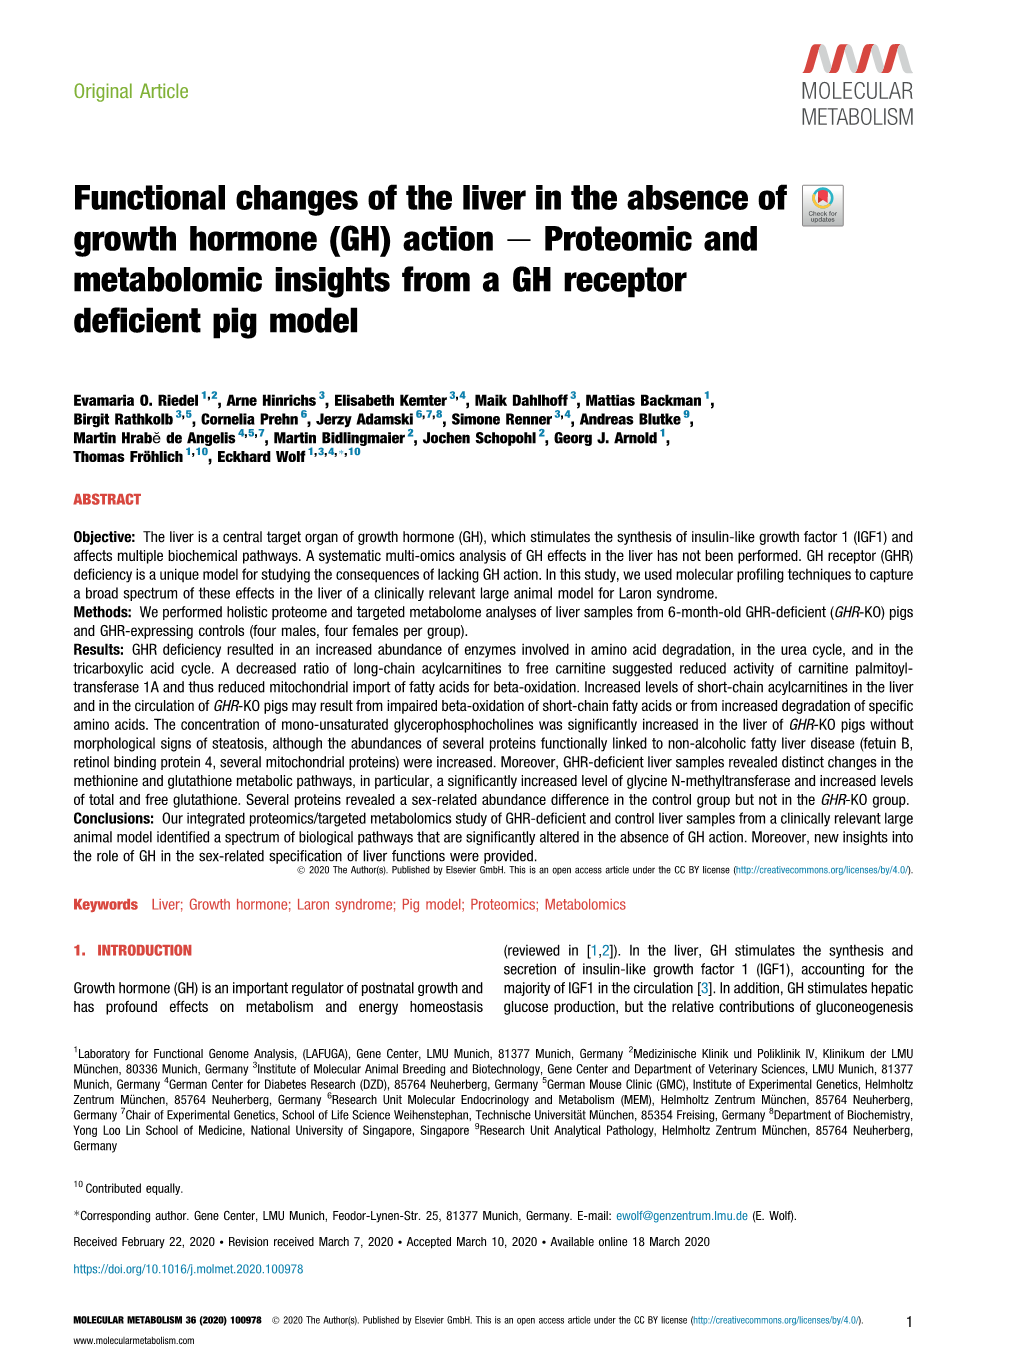 Functional Changes of the Liver in the Absence of Growth Hormone (GH) Action E Proteomic and Metabolomic Insights from a GH Receptor Deﬁcient Pig Model